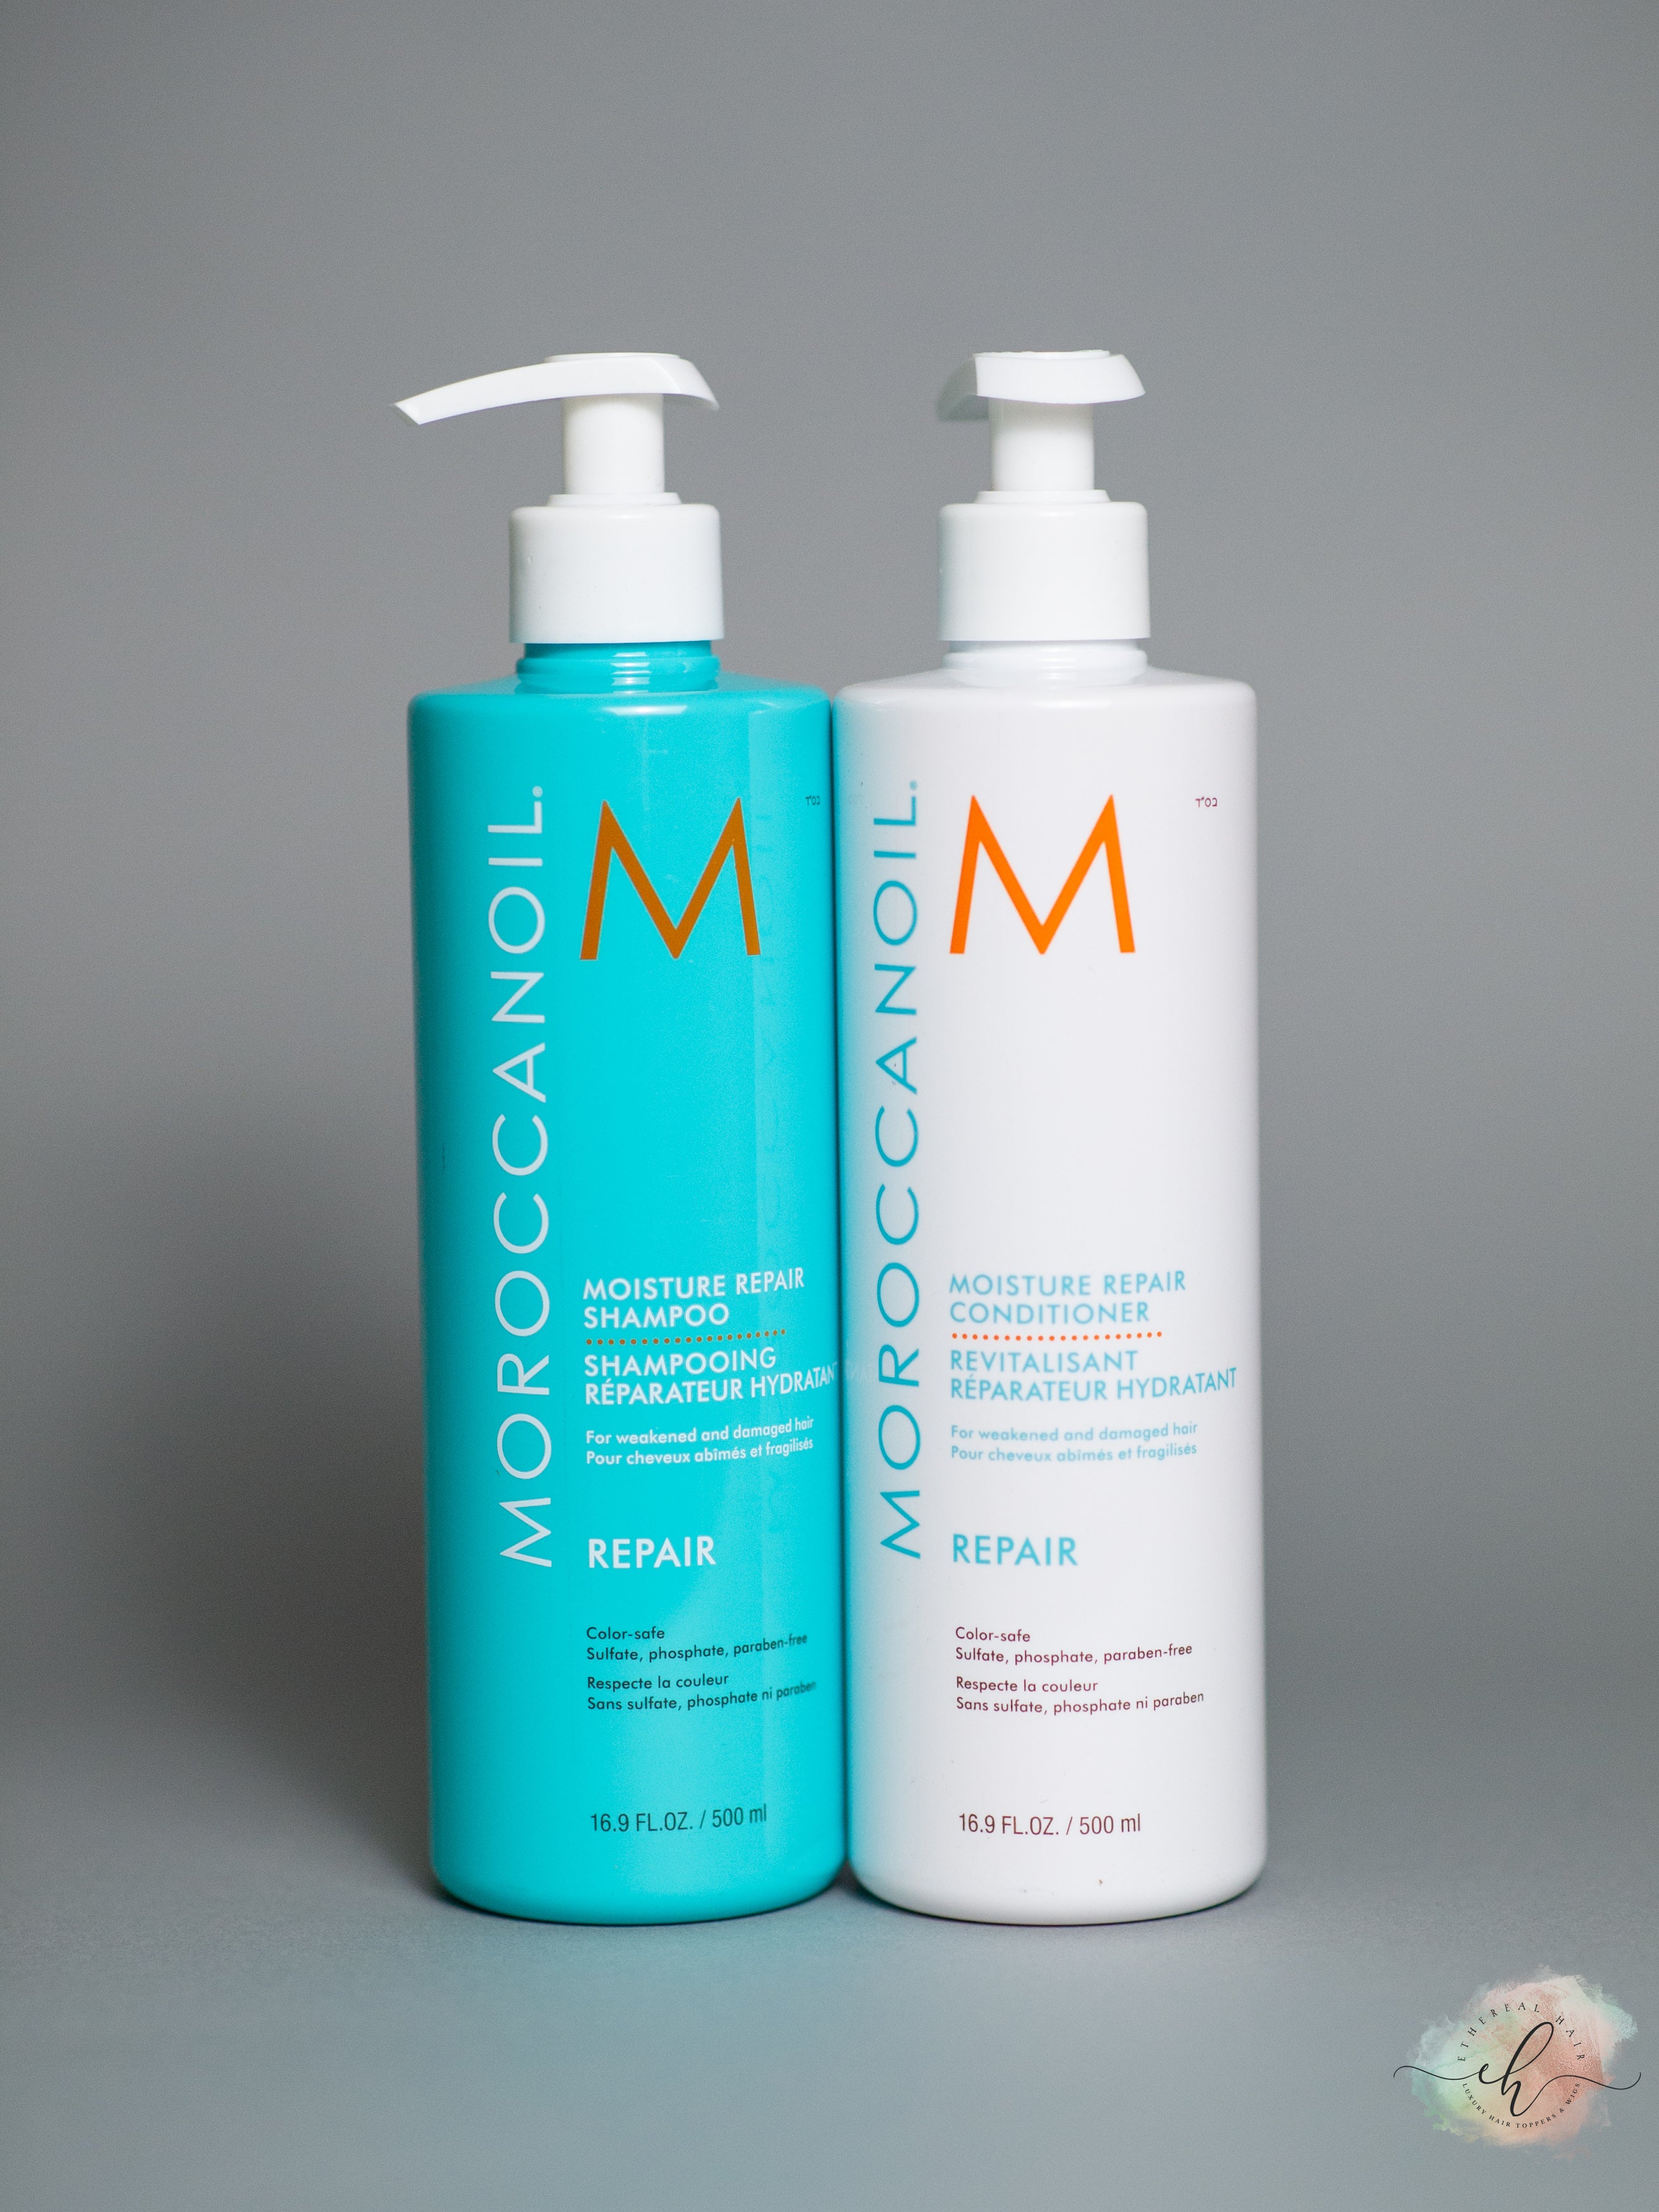 Aktiver Indeholde At give tilladelse MOROCCANOIL Repair Shampoo & Conditioner Duo - ETHEREAL HAIR